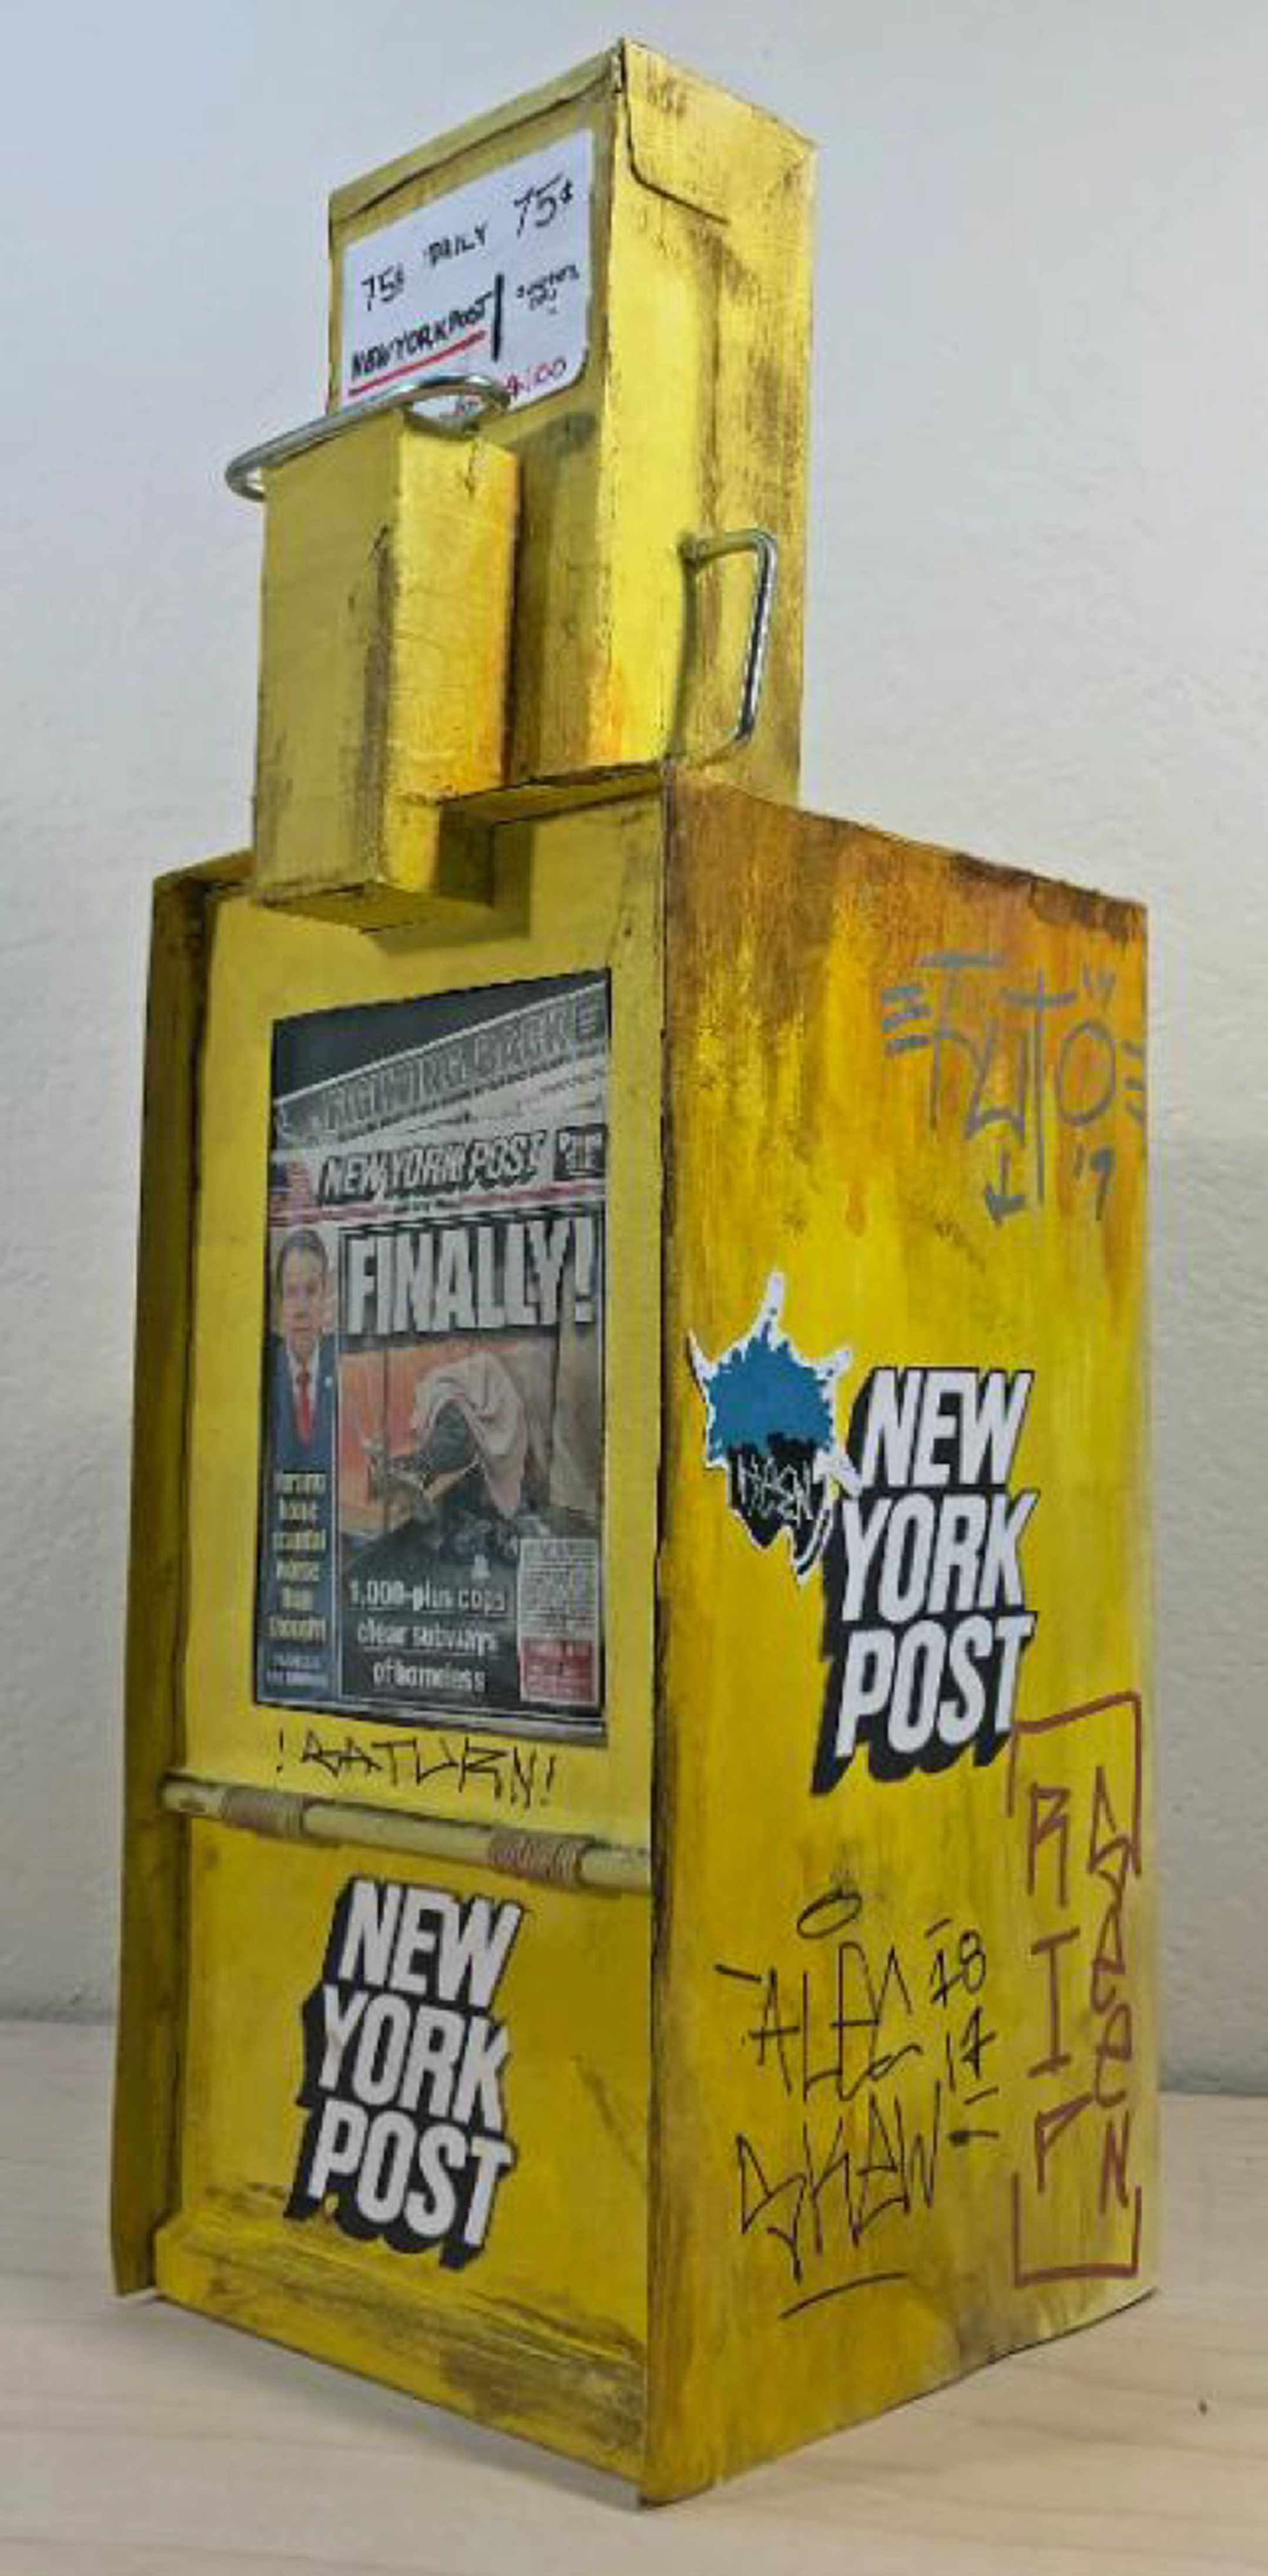 A miniature reproduction of a beat up yellow New York post newspaper box 